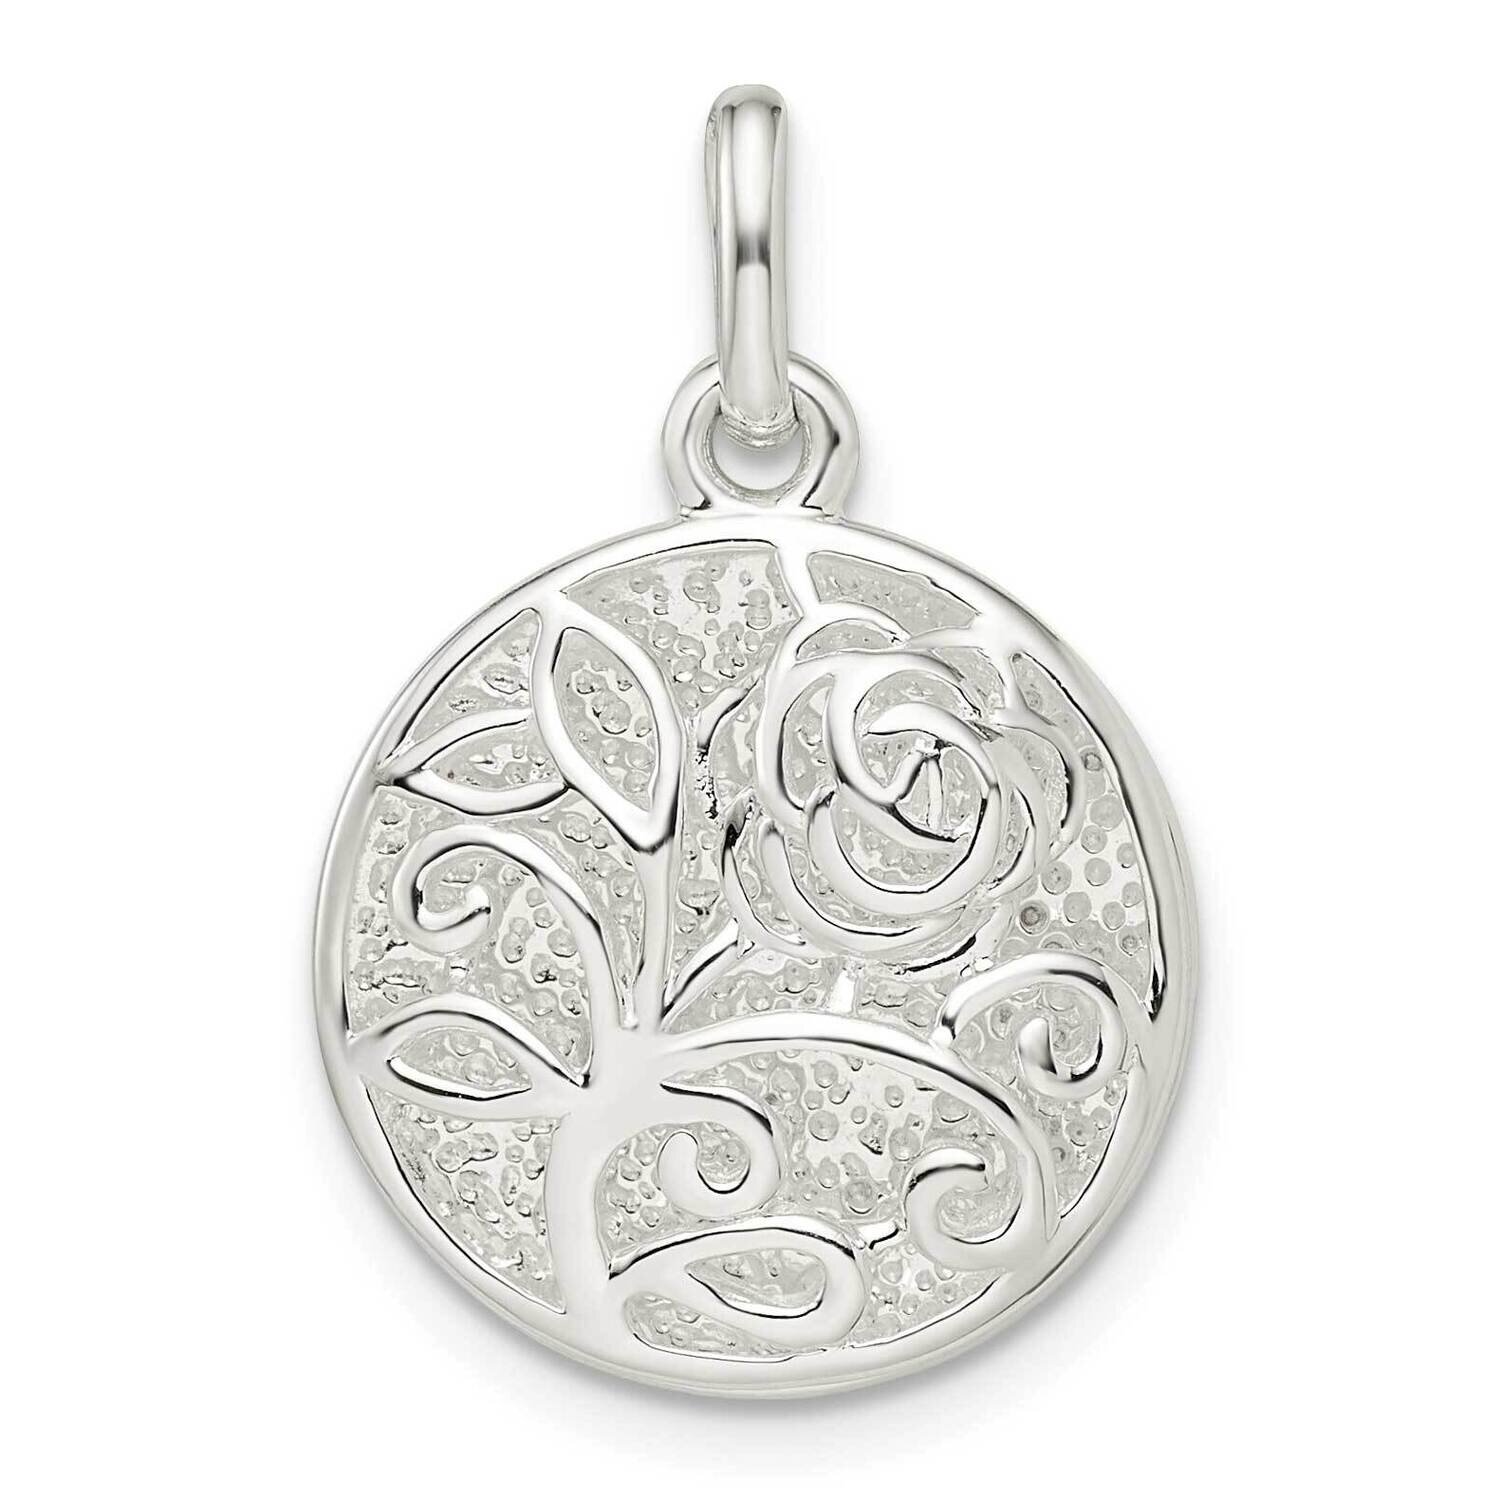 Rose Pendant Sterling Silver Textured QC11030